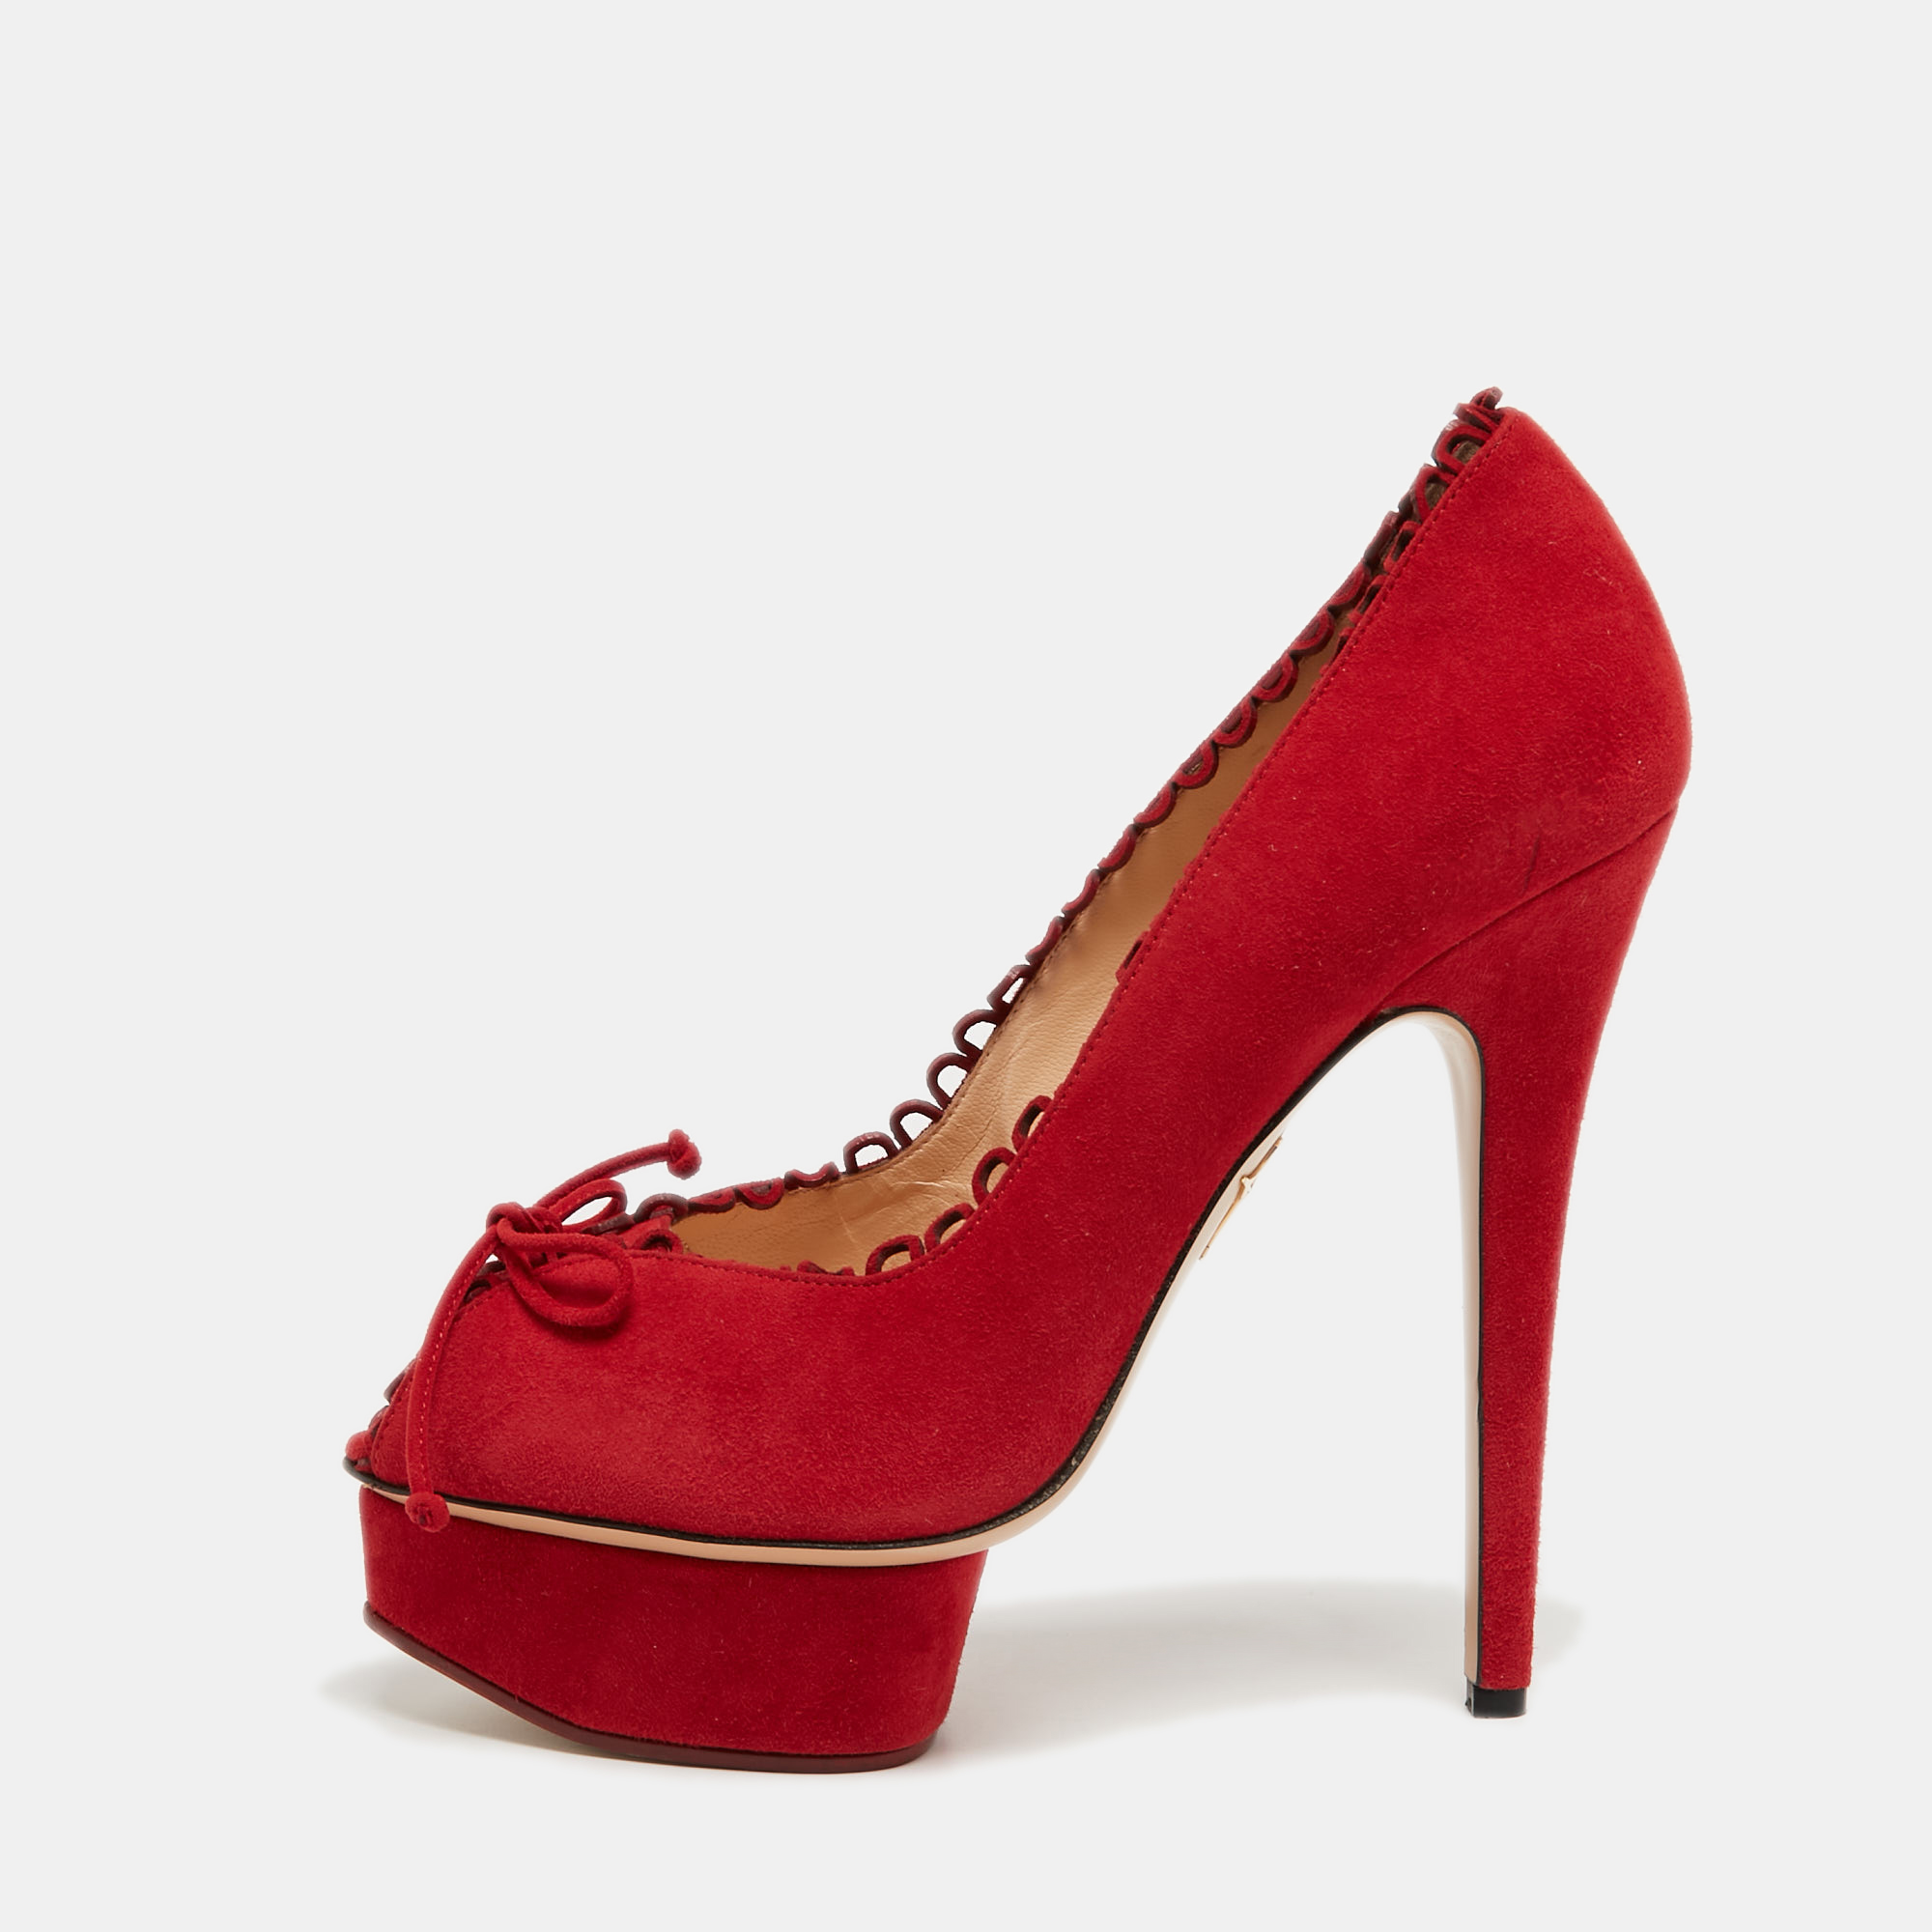 Pre-owned Charlotte Olympia Red Suede Daphne Scalloped Trim Peep Toe Platform Pumps Size 40.5